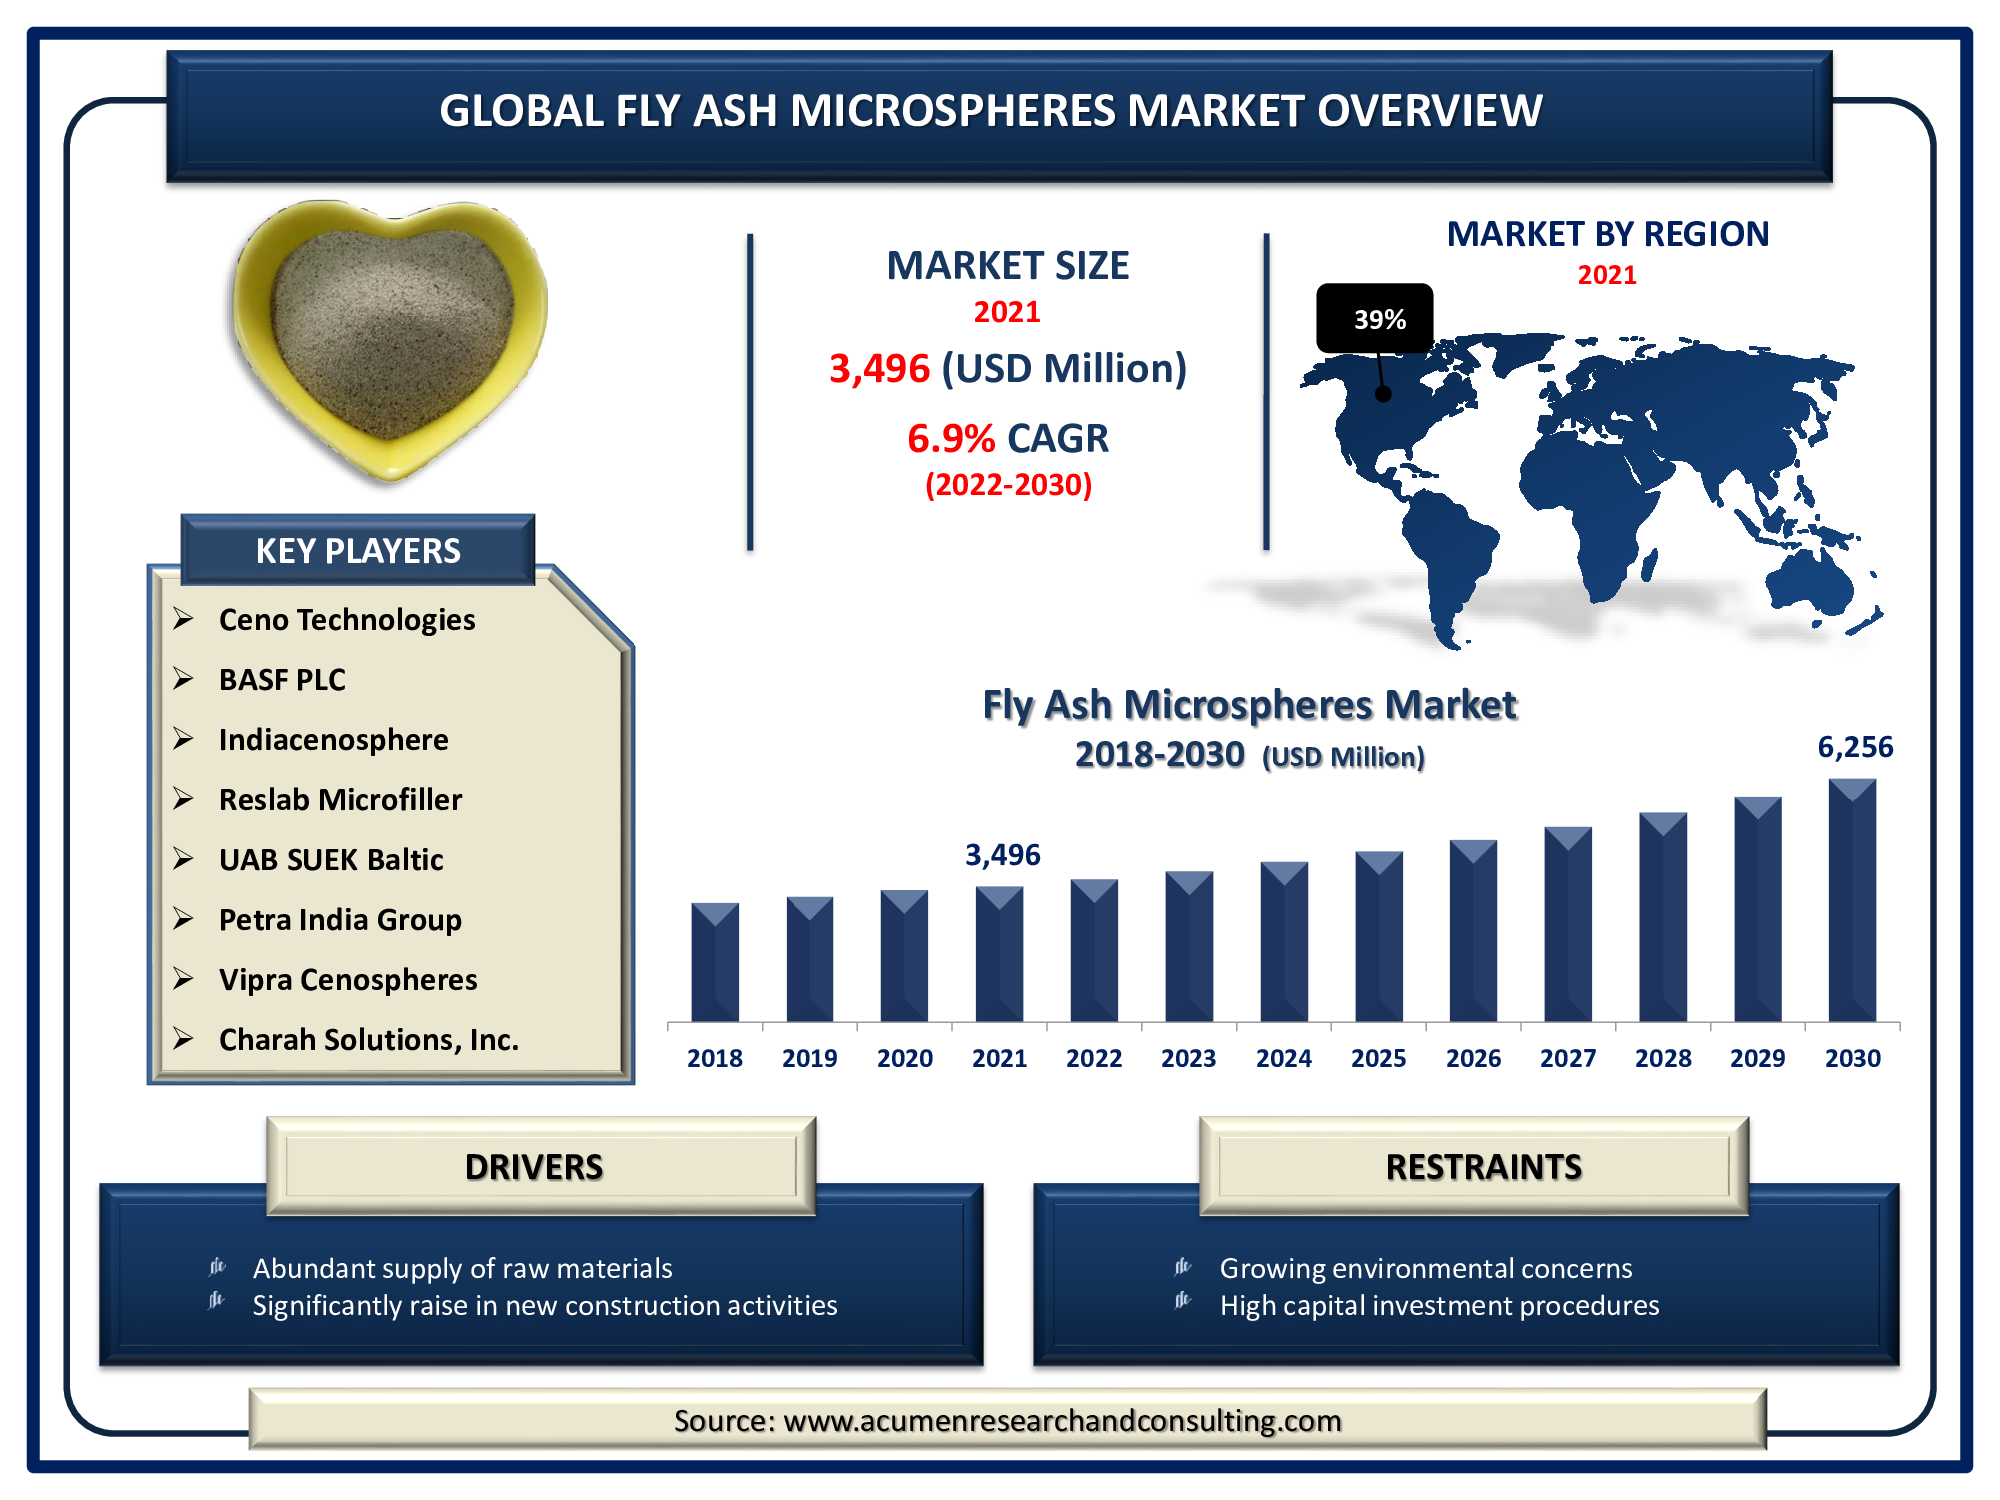 Fly Ash Microspheres Market is predicted to be worth USD 6,256 Million by 2030, with a CAGR of 6.9%